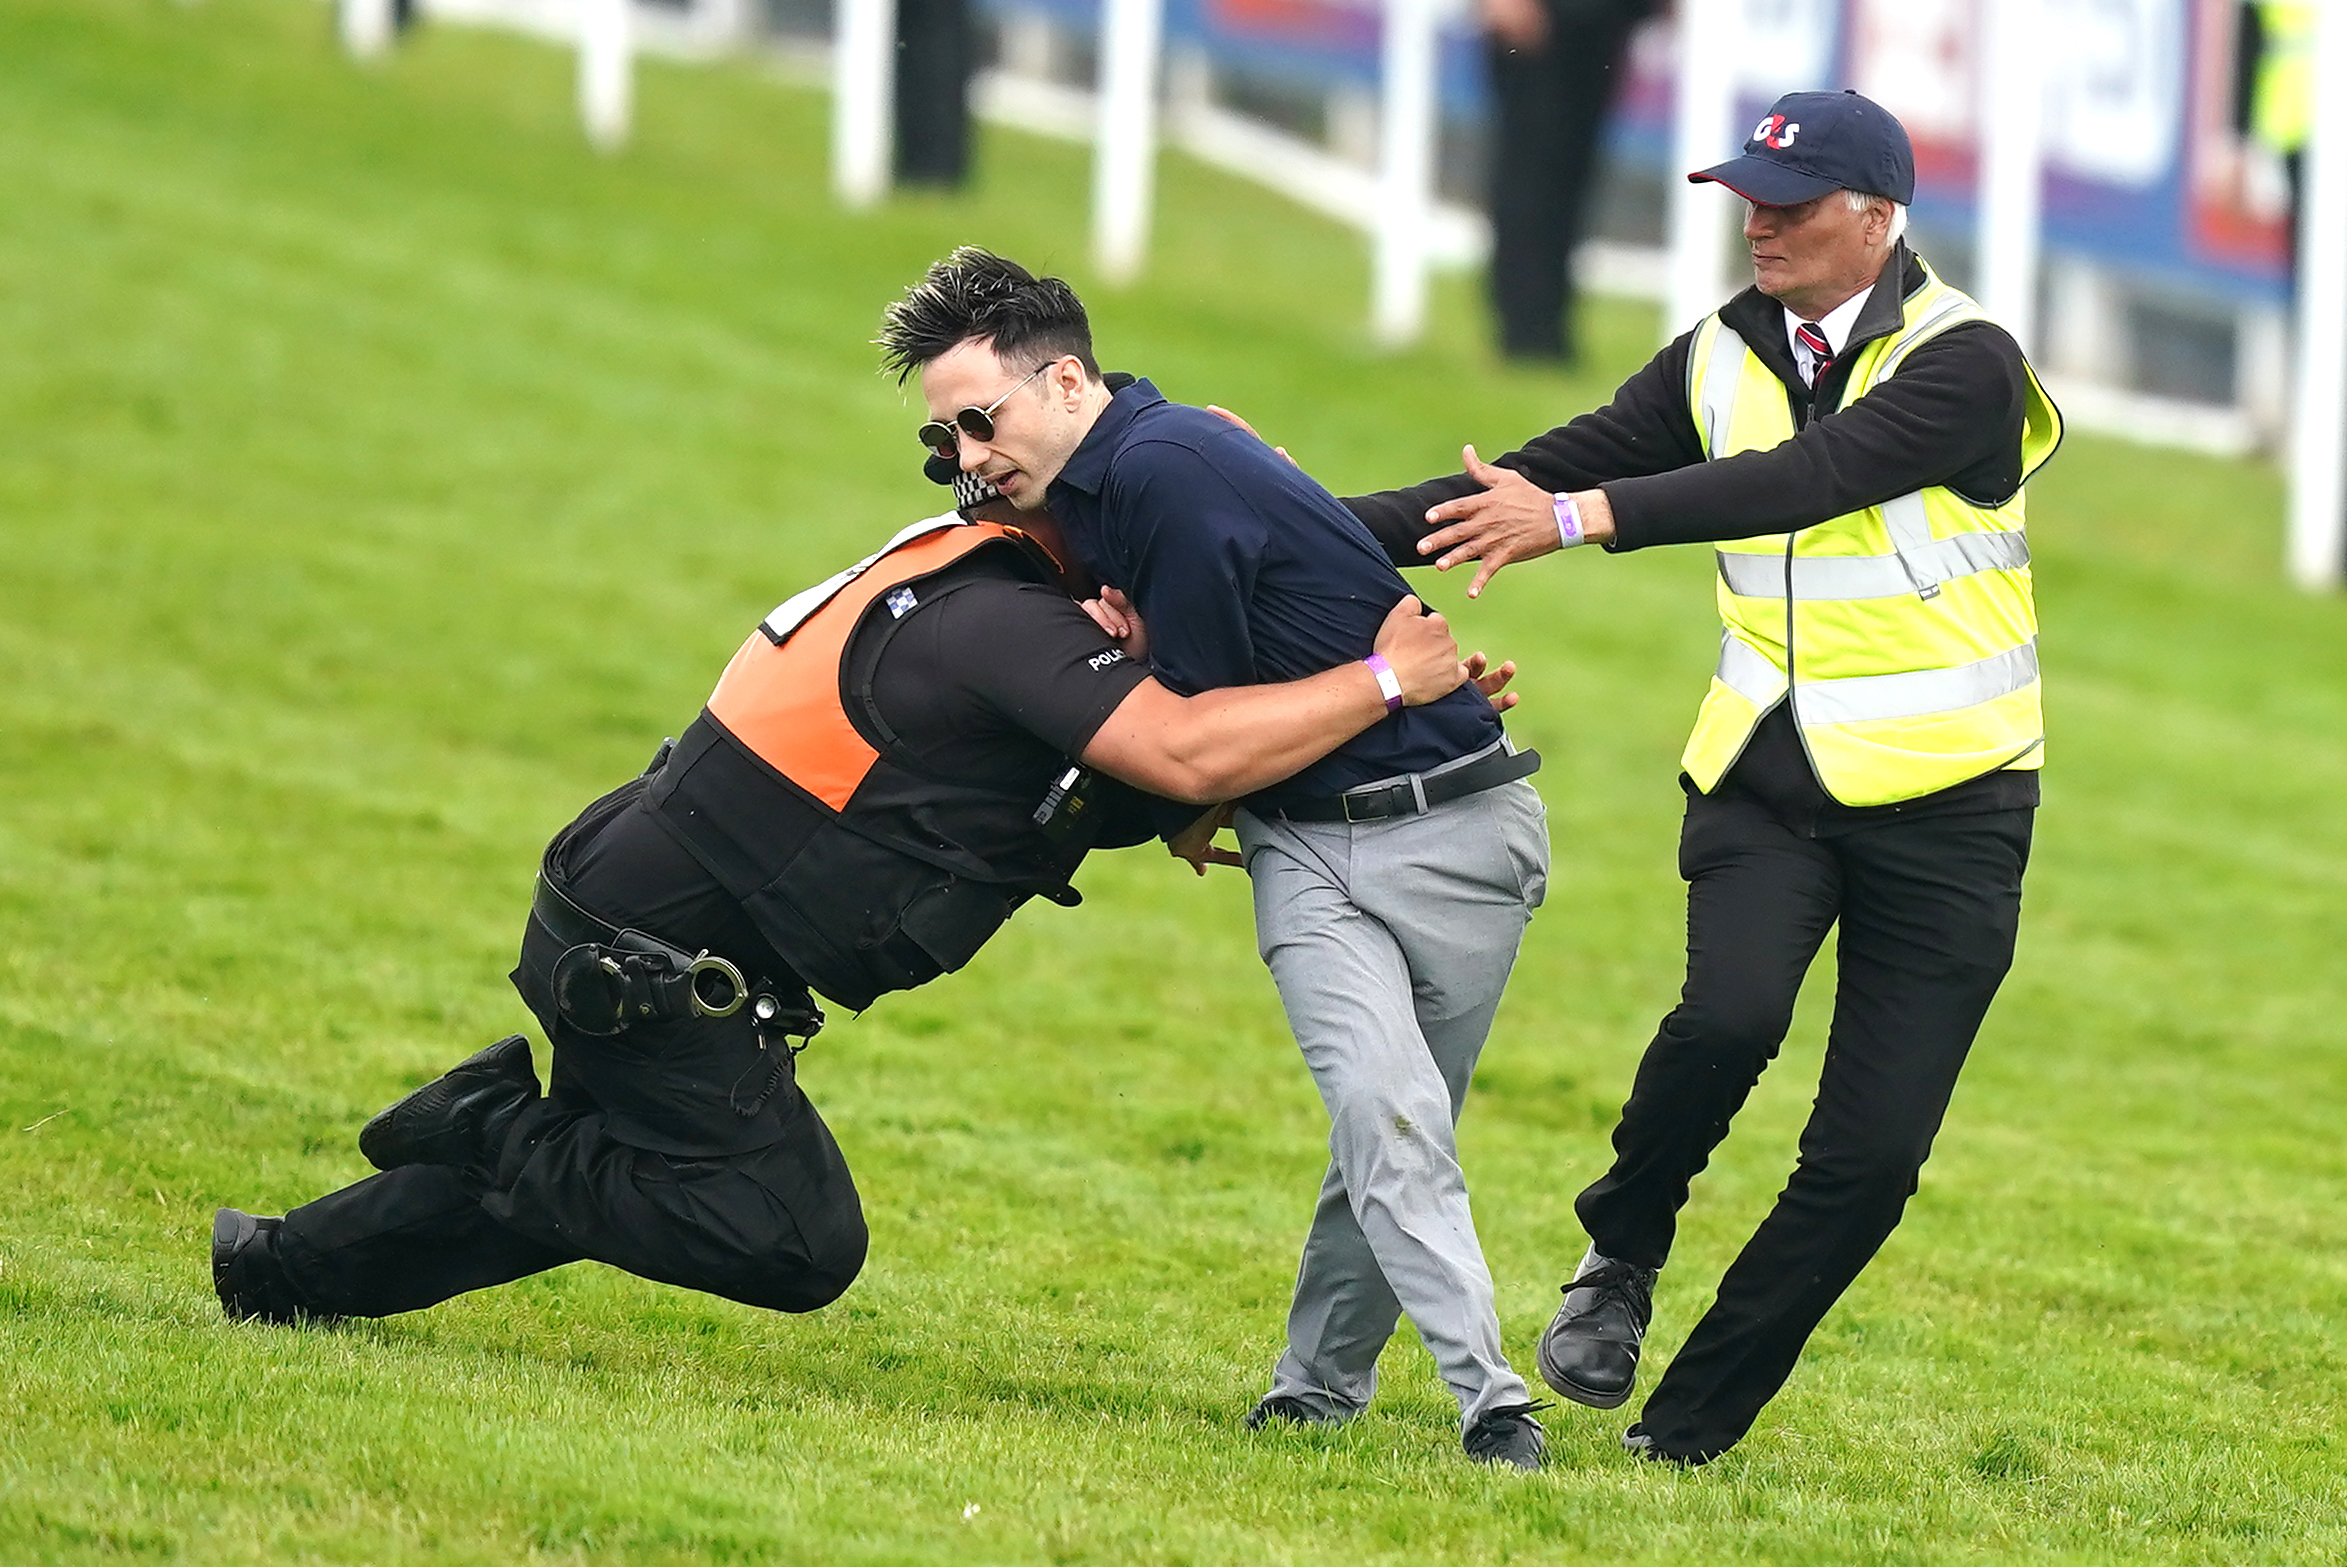 Protestor sprinting on Epsom Derby racecourse tackled as animal activists’ plot to disrupt race is foiled